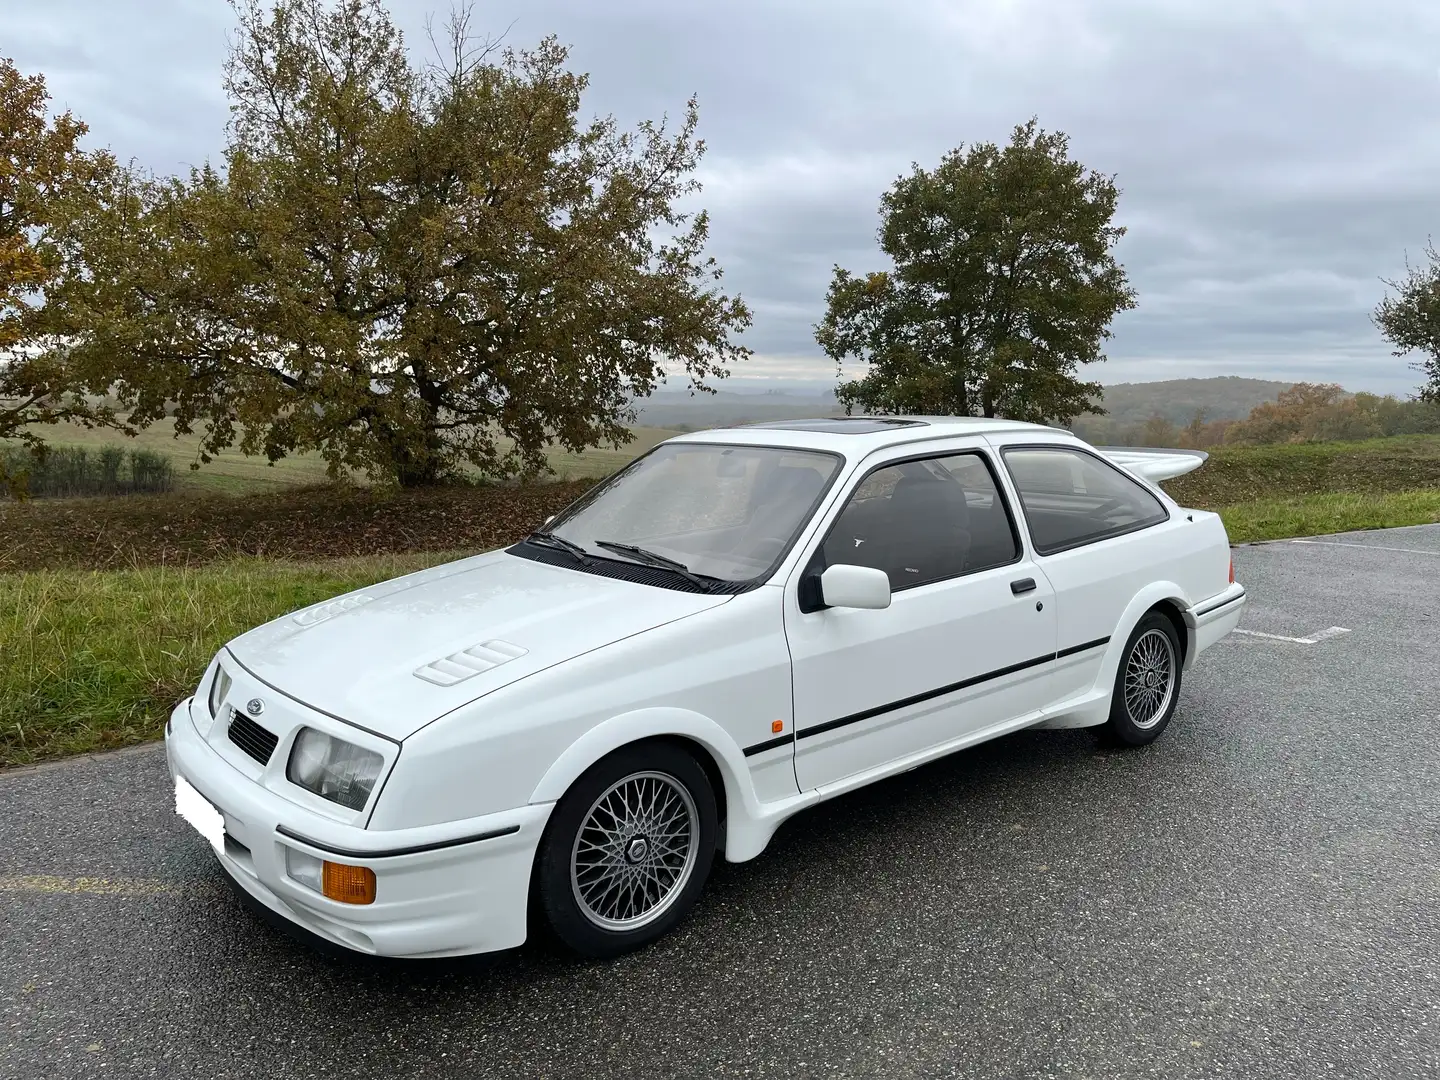 Ford Sierra 2.0i Tbo RS Cosworth / ETAT EXCEPTIONNEL Wit - 1